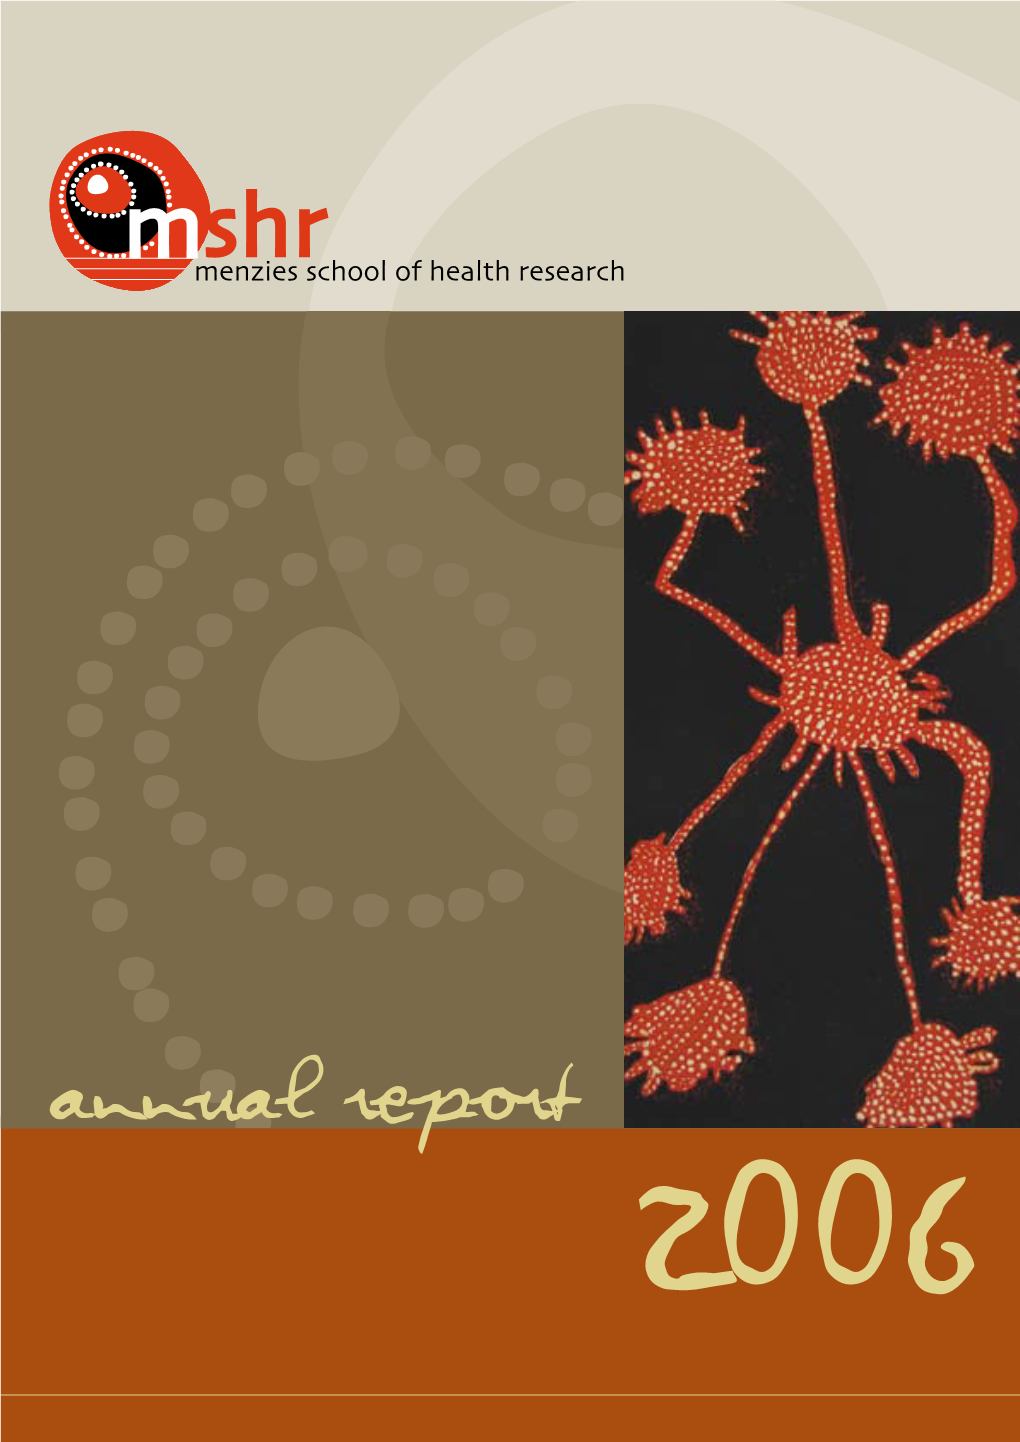 2006 Annual Report, My First As Improving Links with and Transfer of Information to and from Our Partners, Director